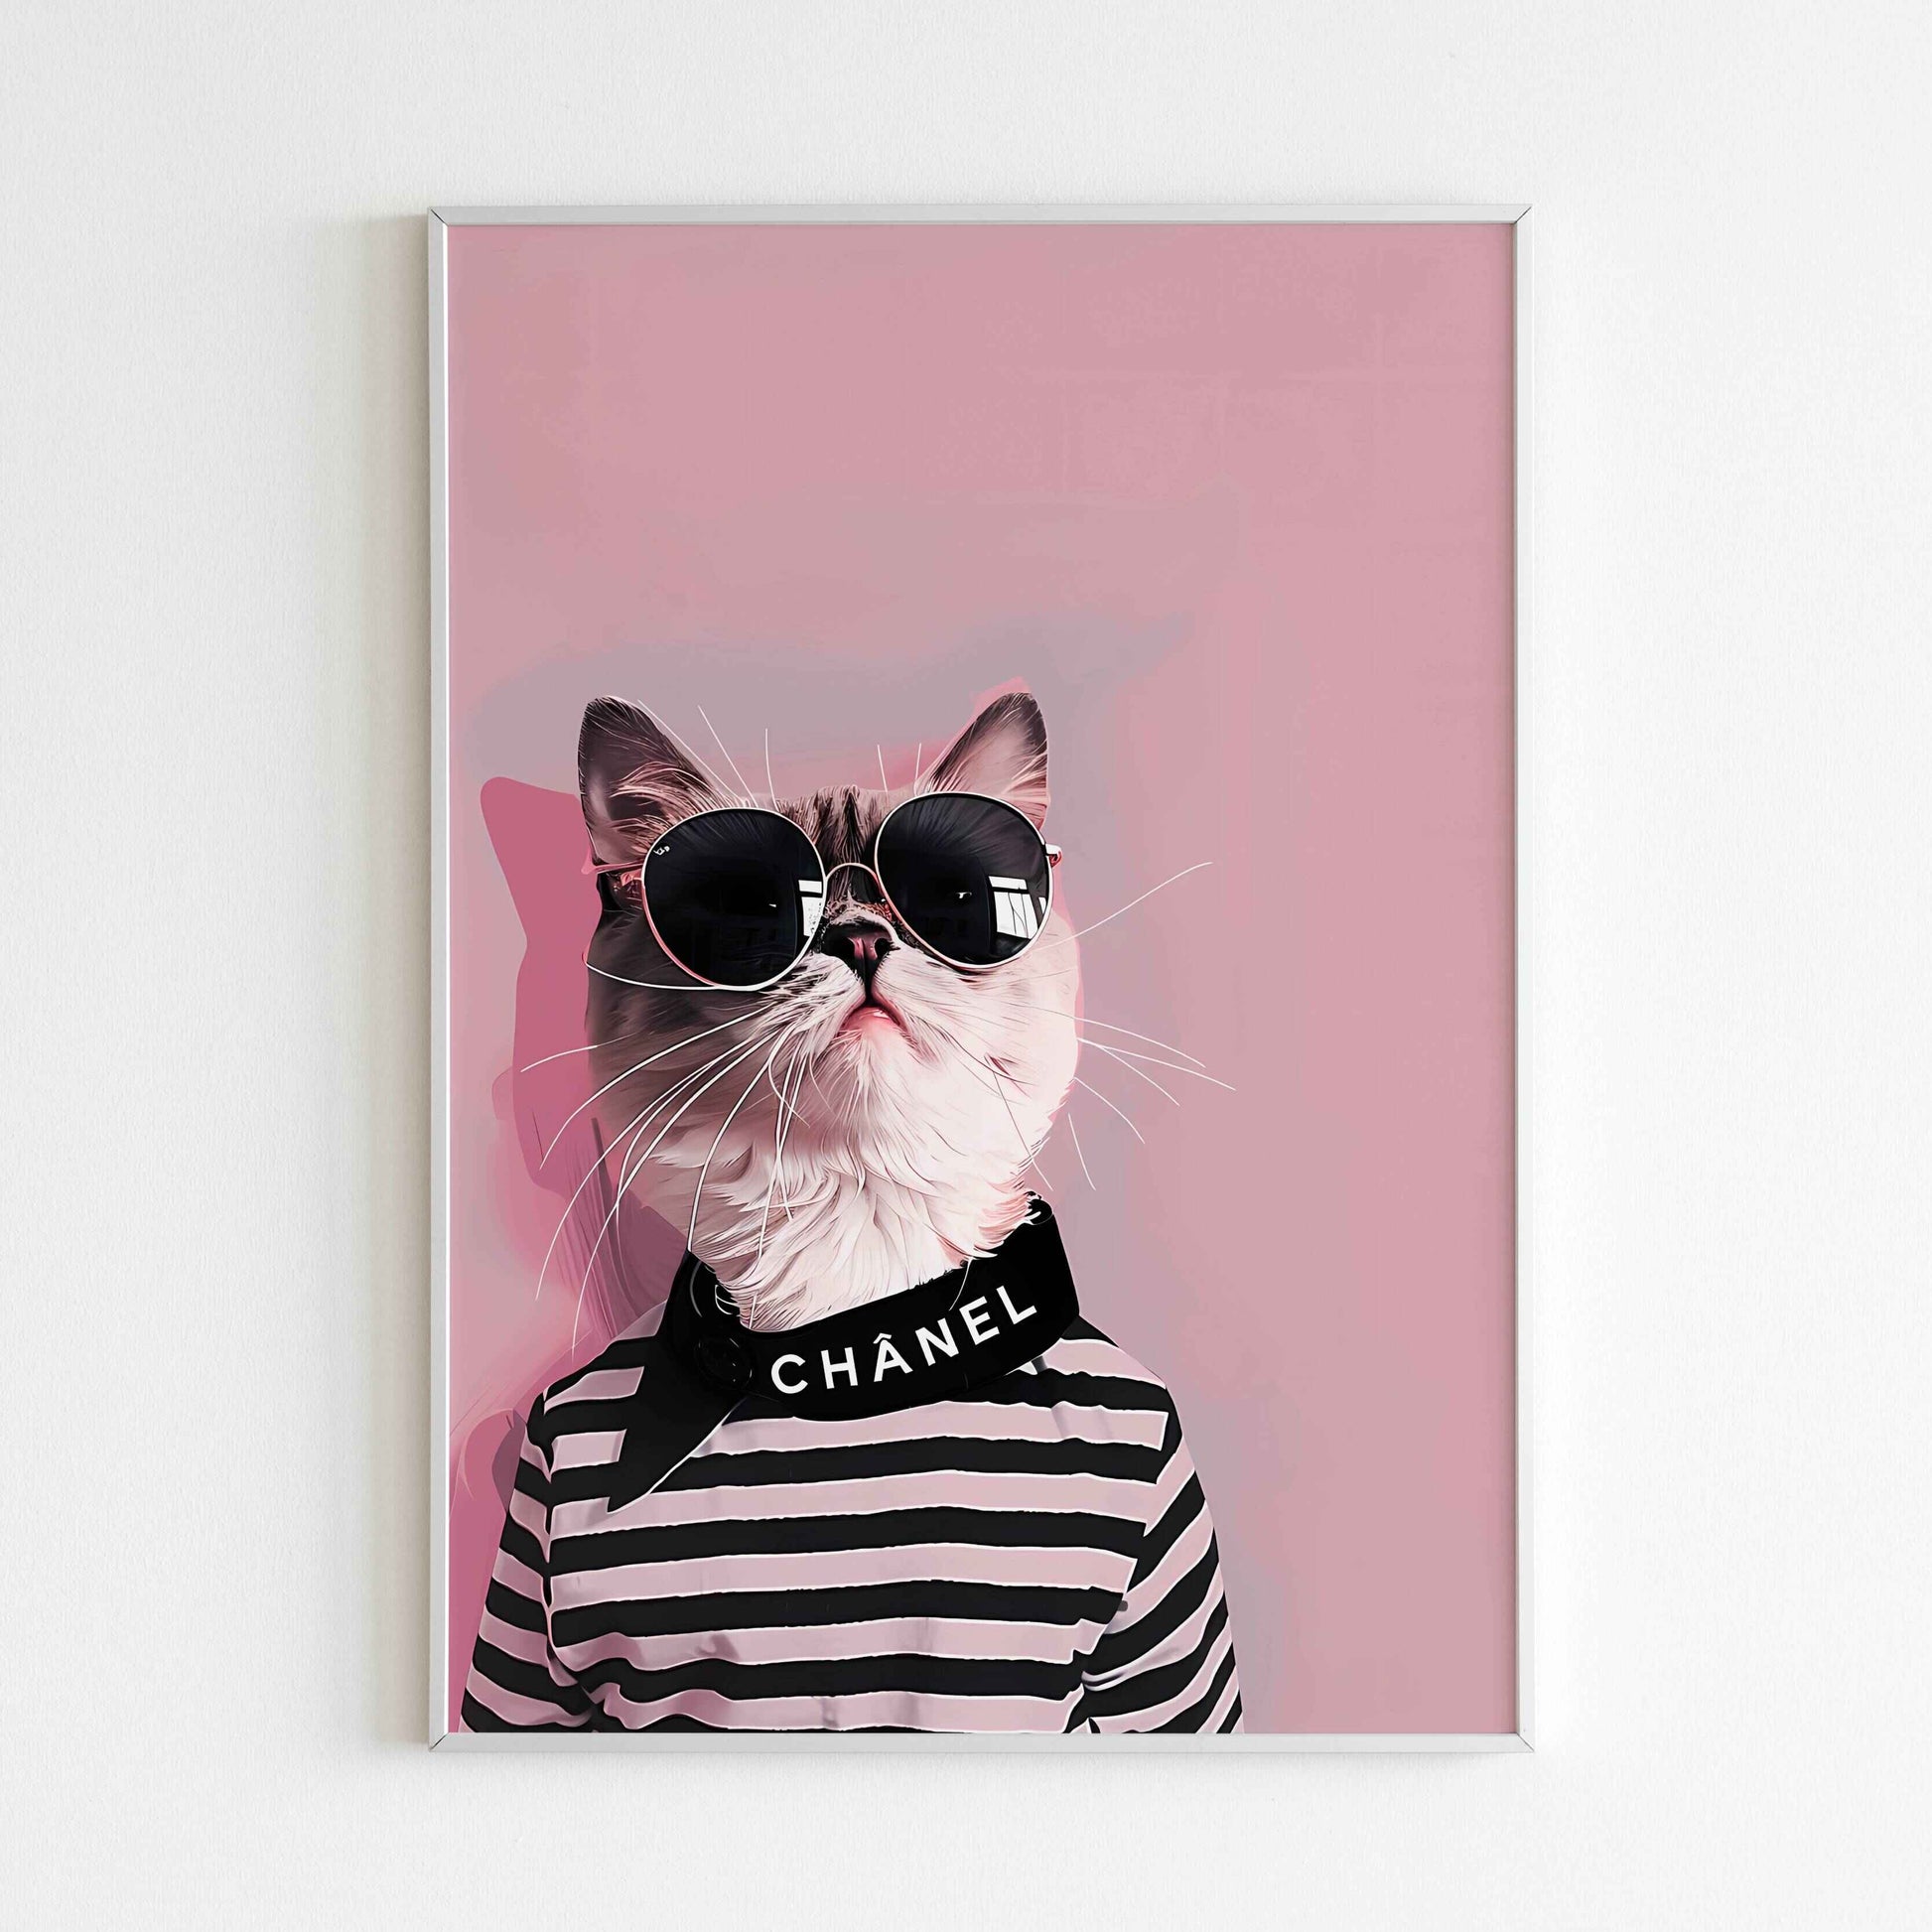 Meet a cool kitten with this Cool Kitten(1 of 2) printable poster (physical or digital)